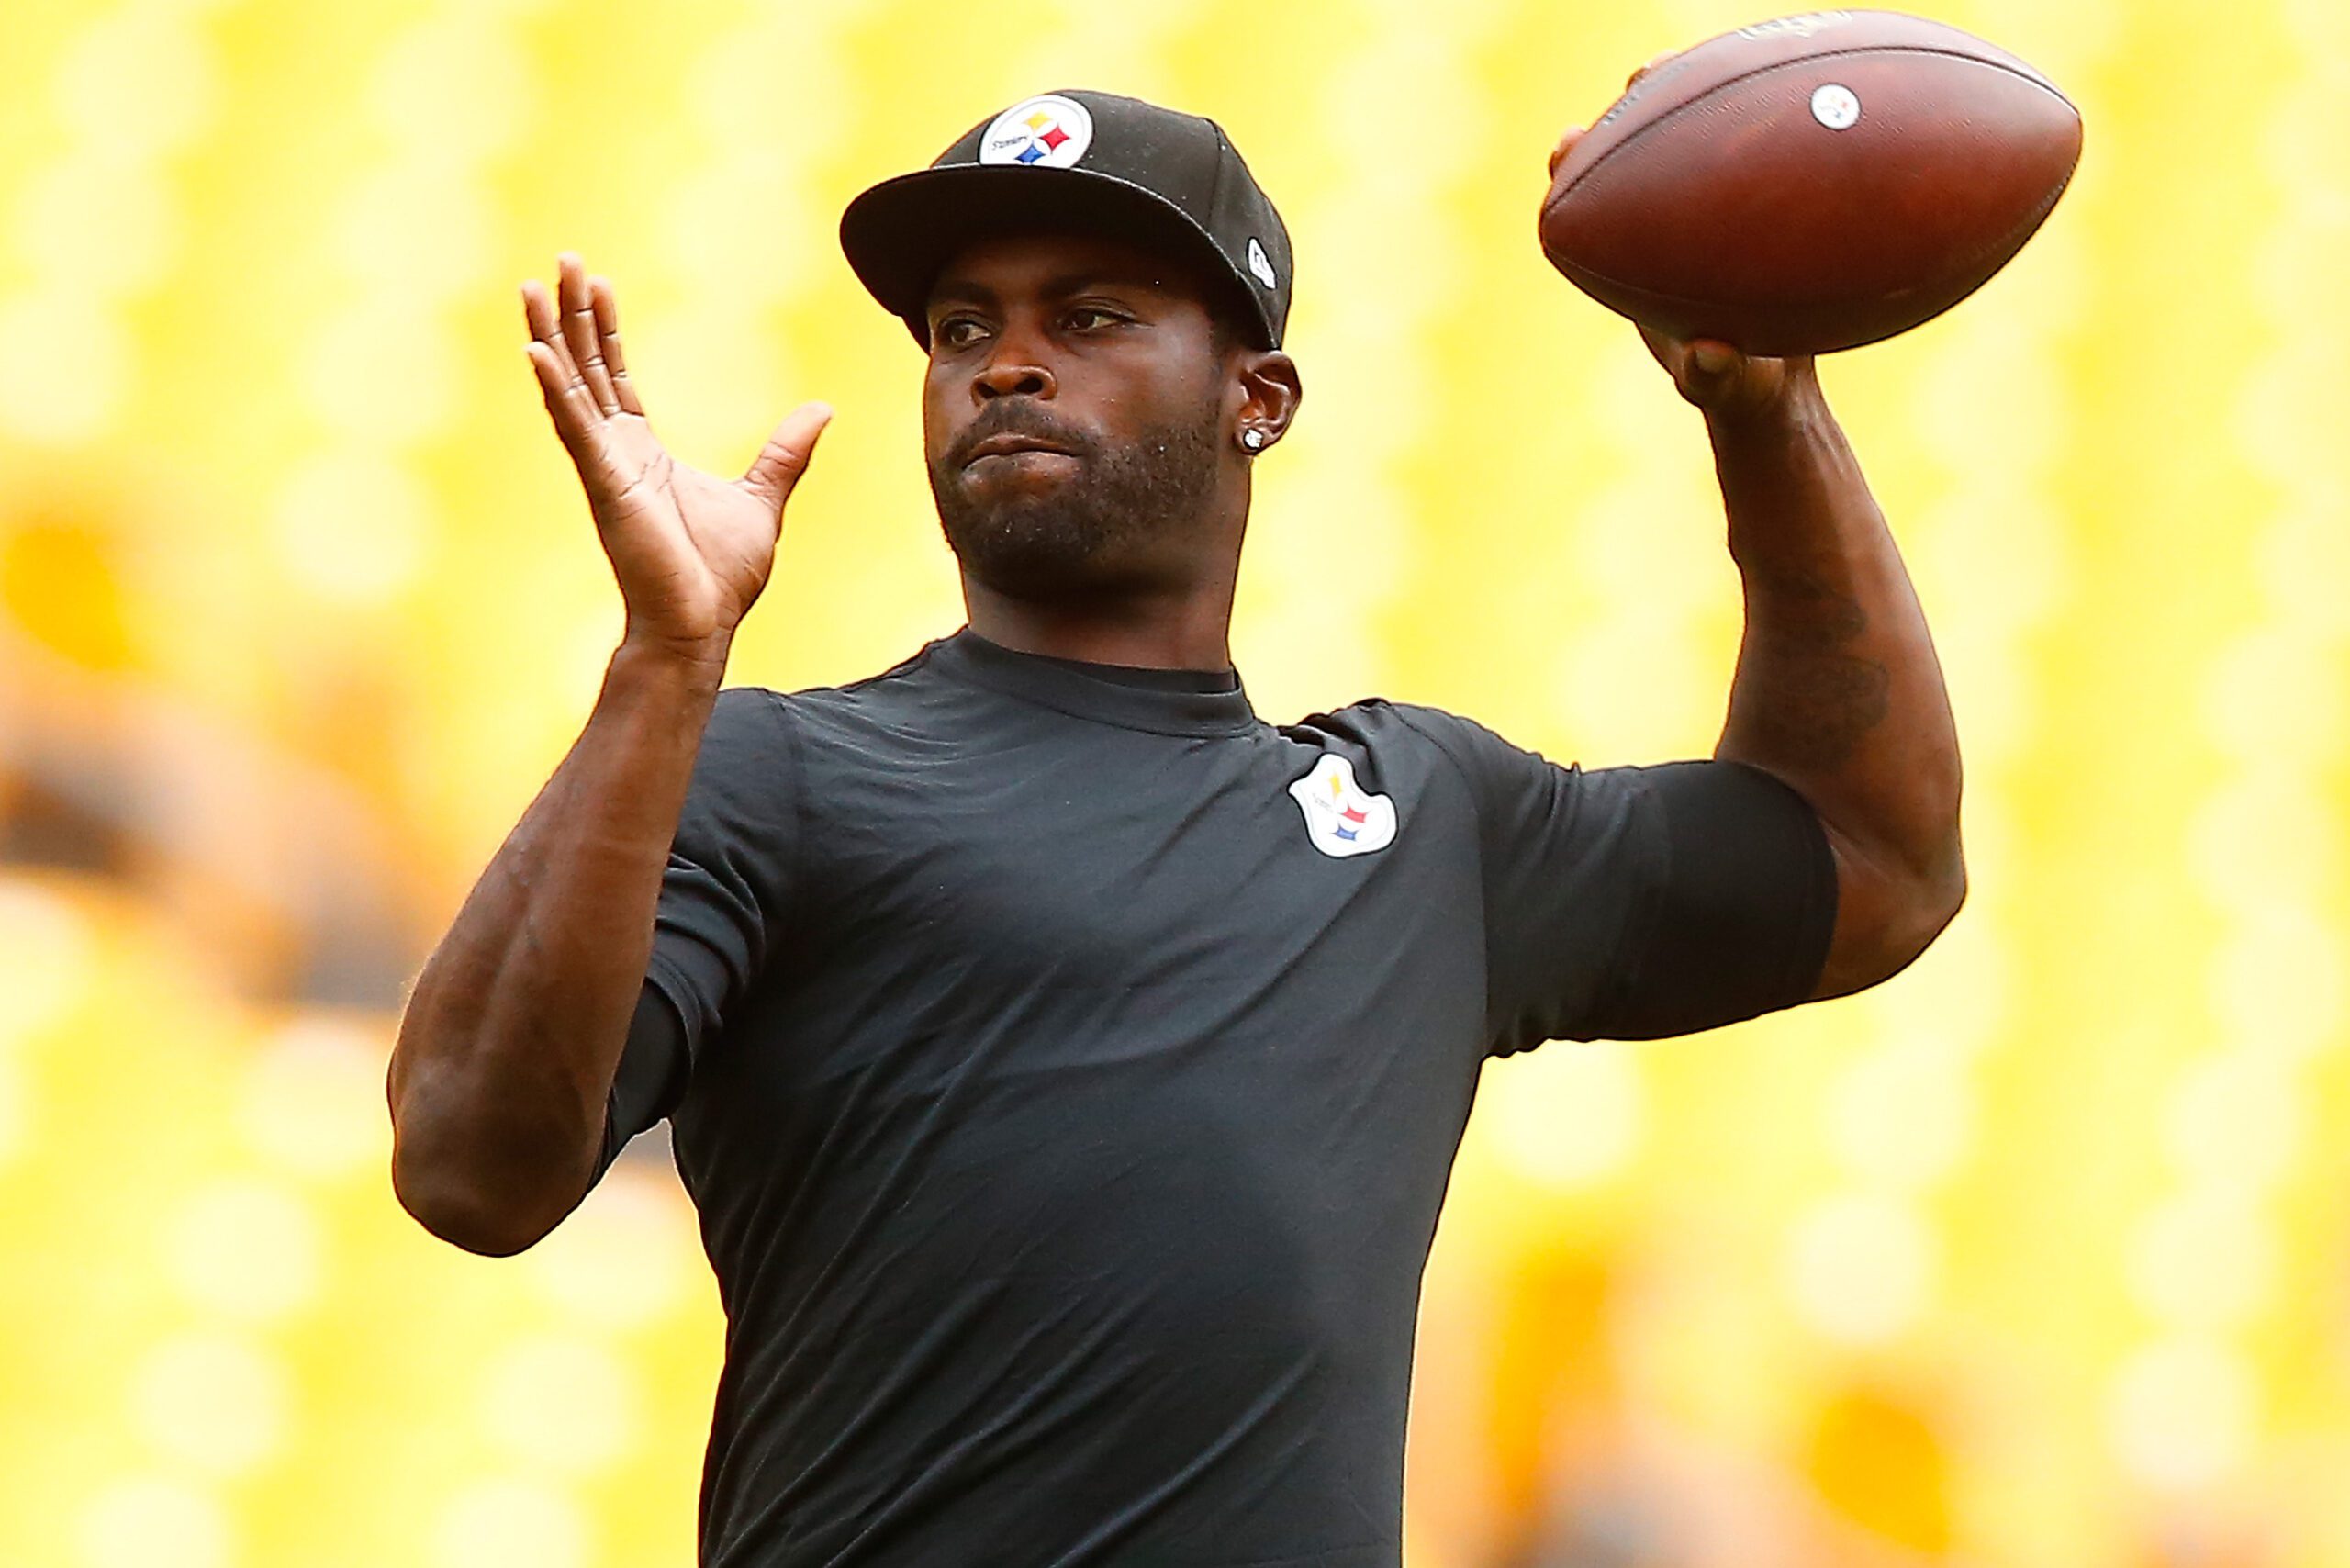 Michael Vick Launches Sports Tech Company called FanField